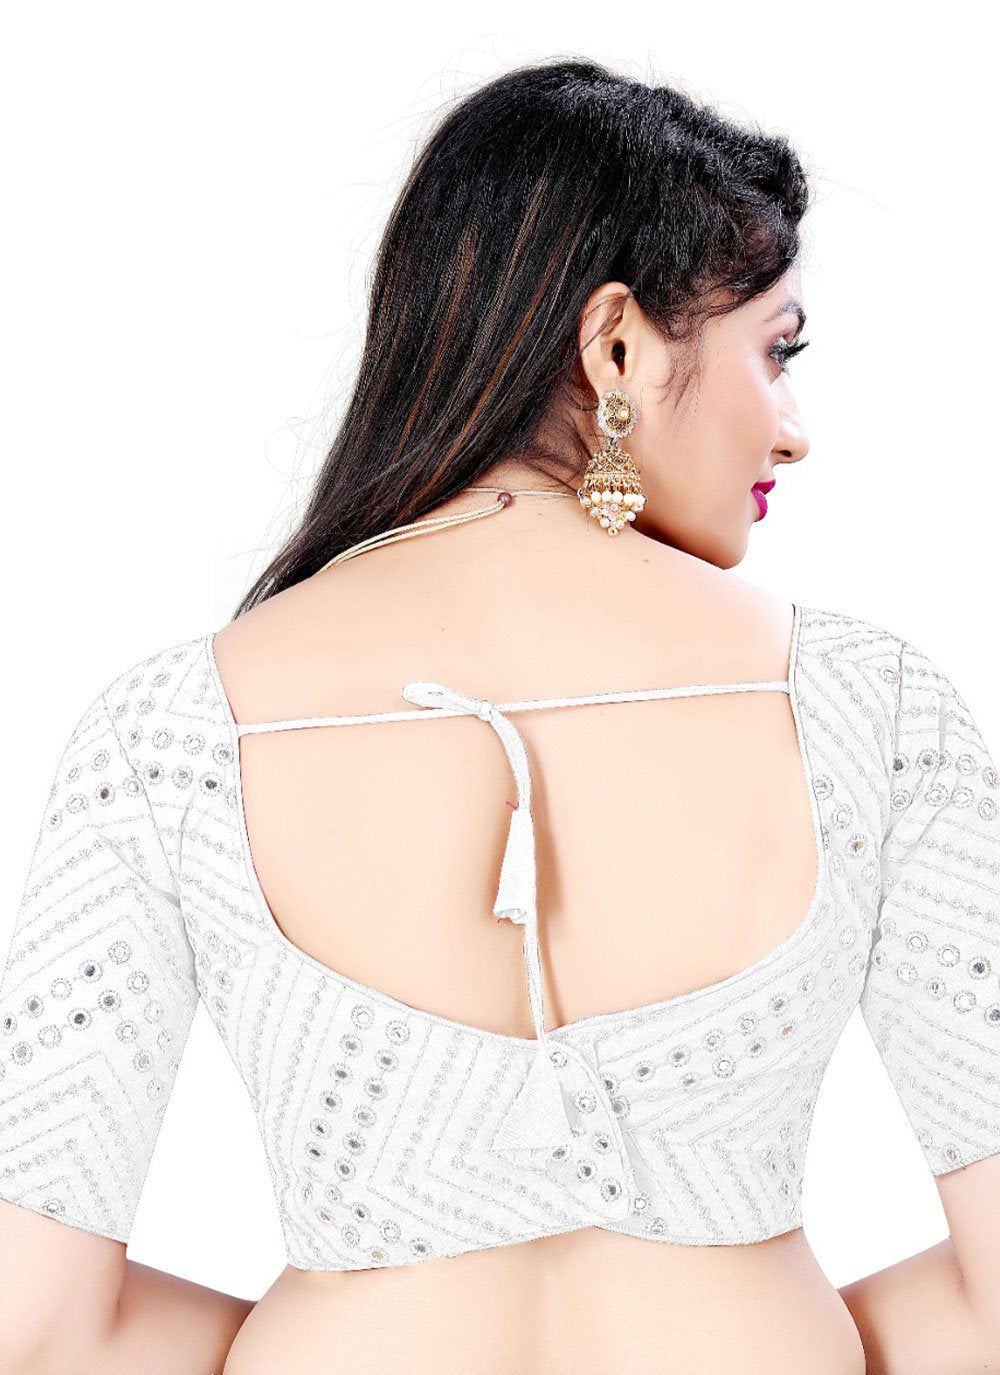 Blouse Georgette White Embroidered Blouse